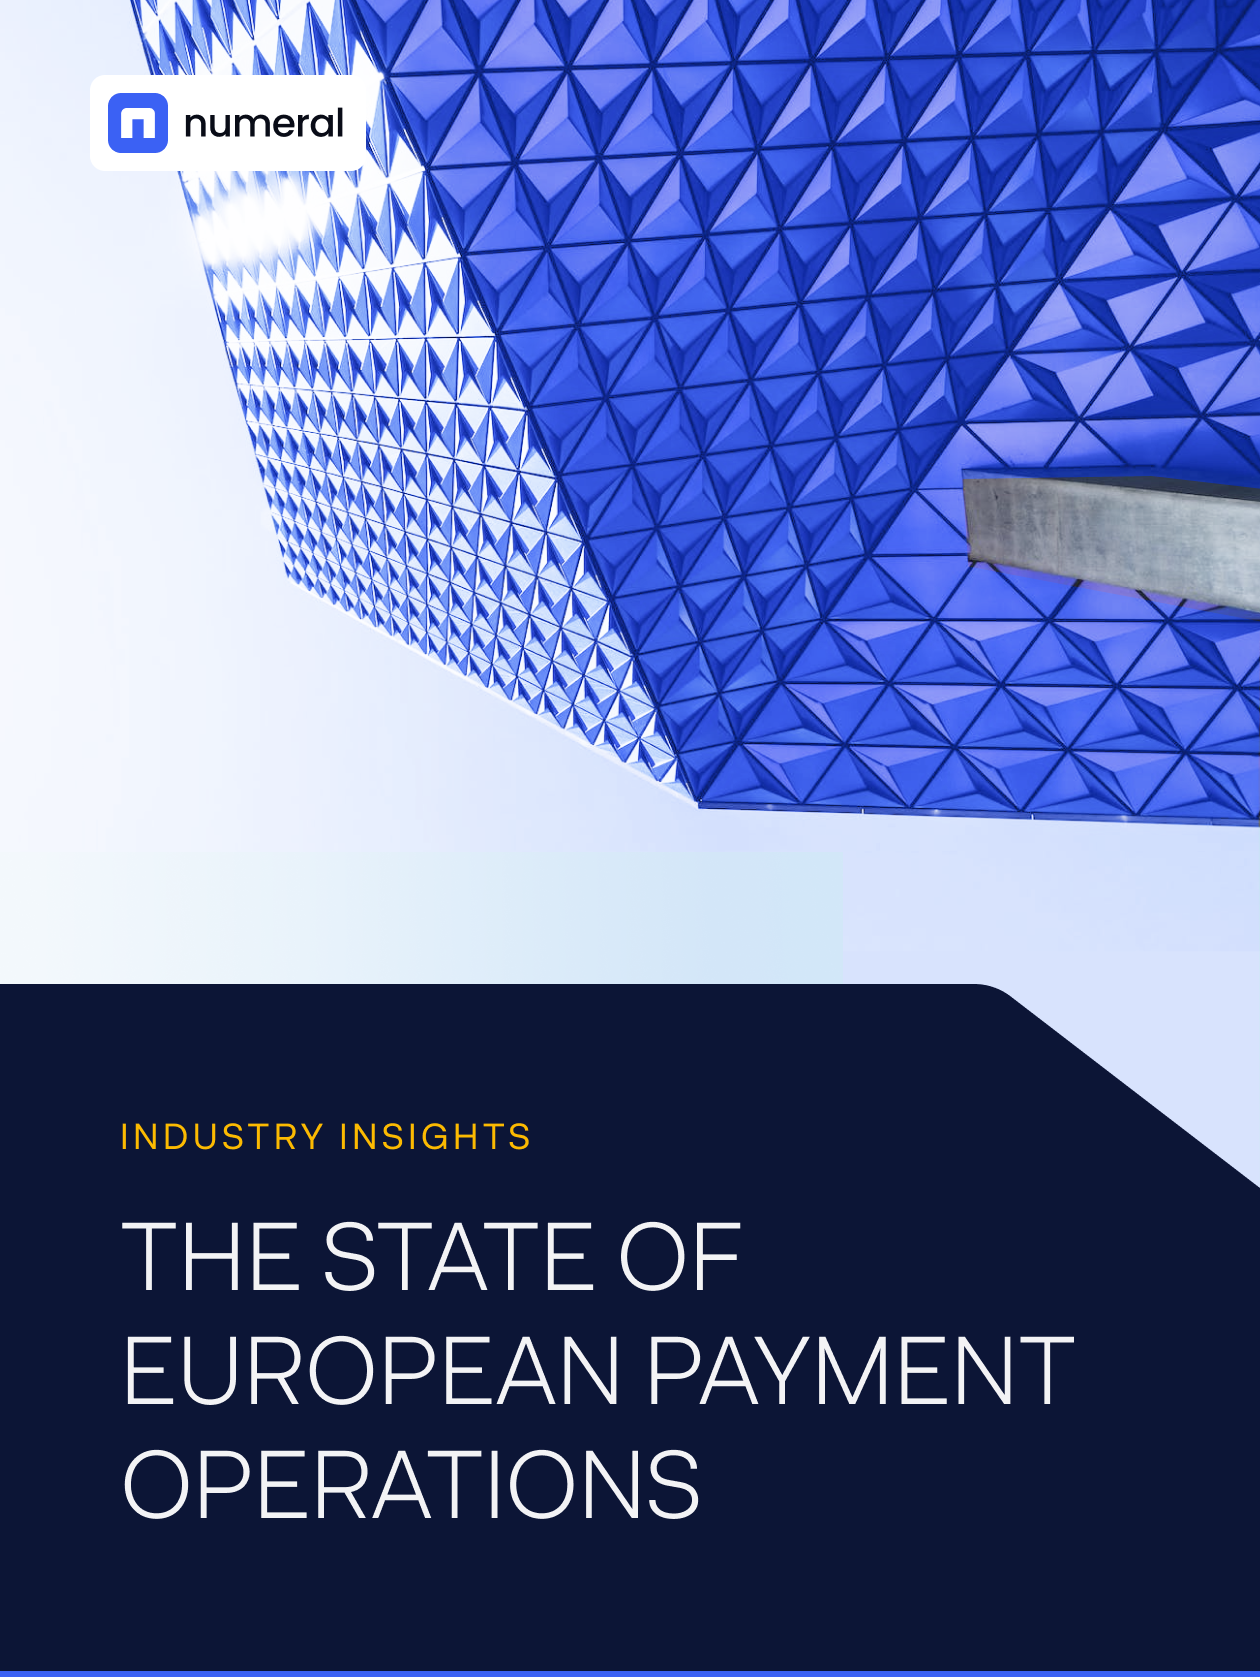 97% of European companies experience problems with their current payment systems, new Numeral research shows thumbnail